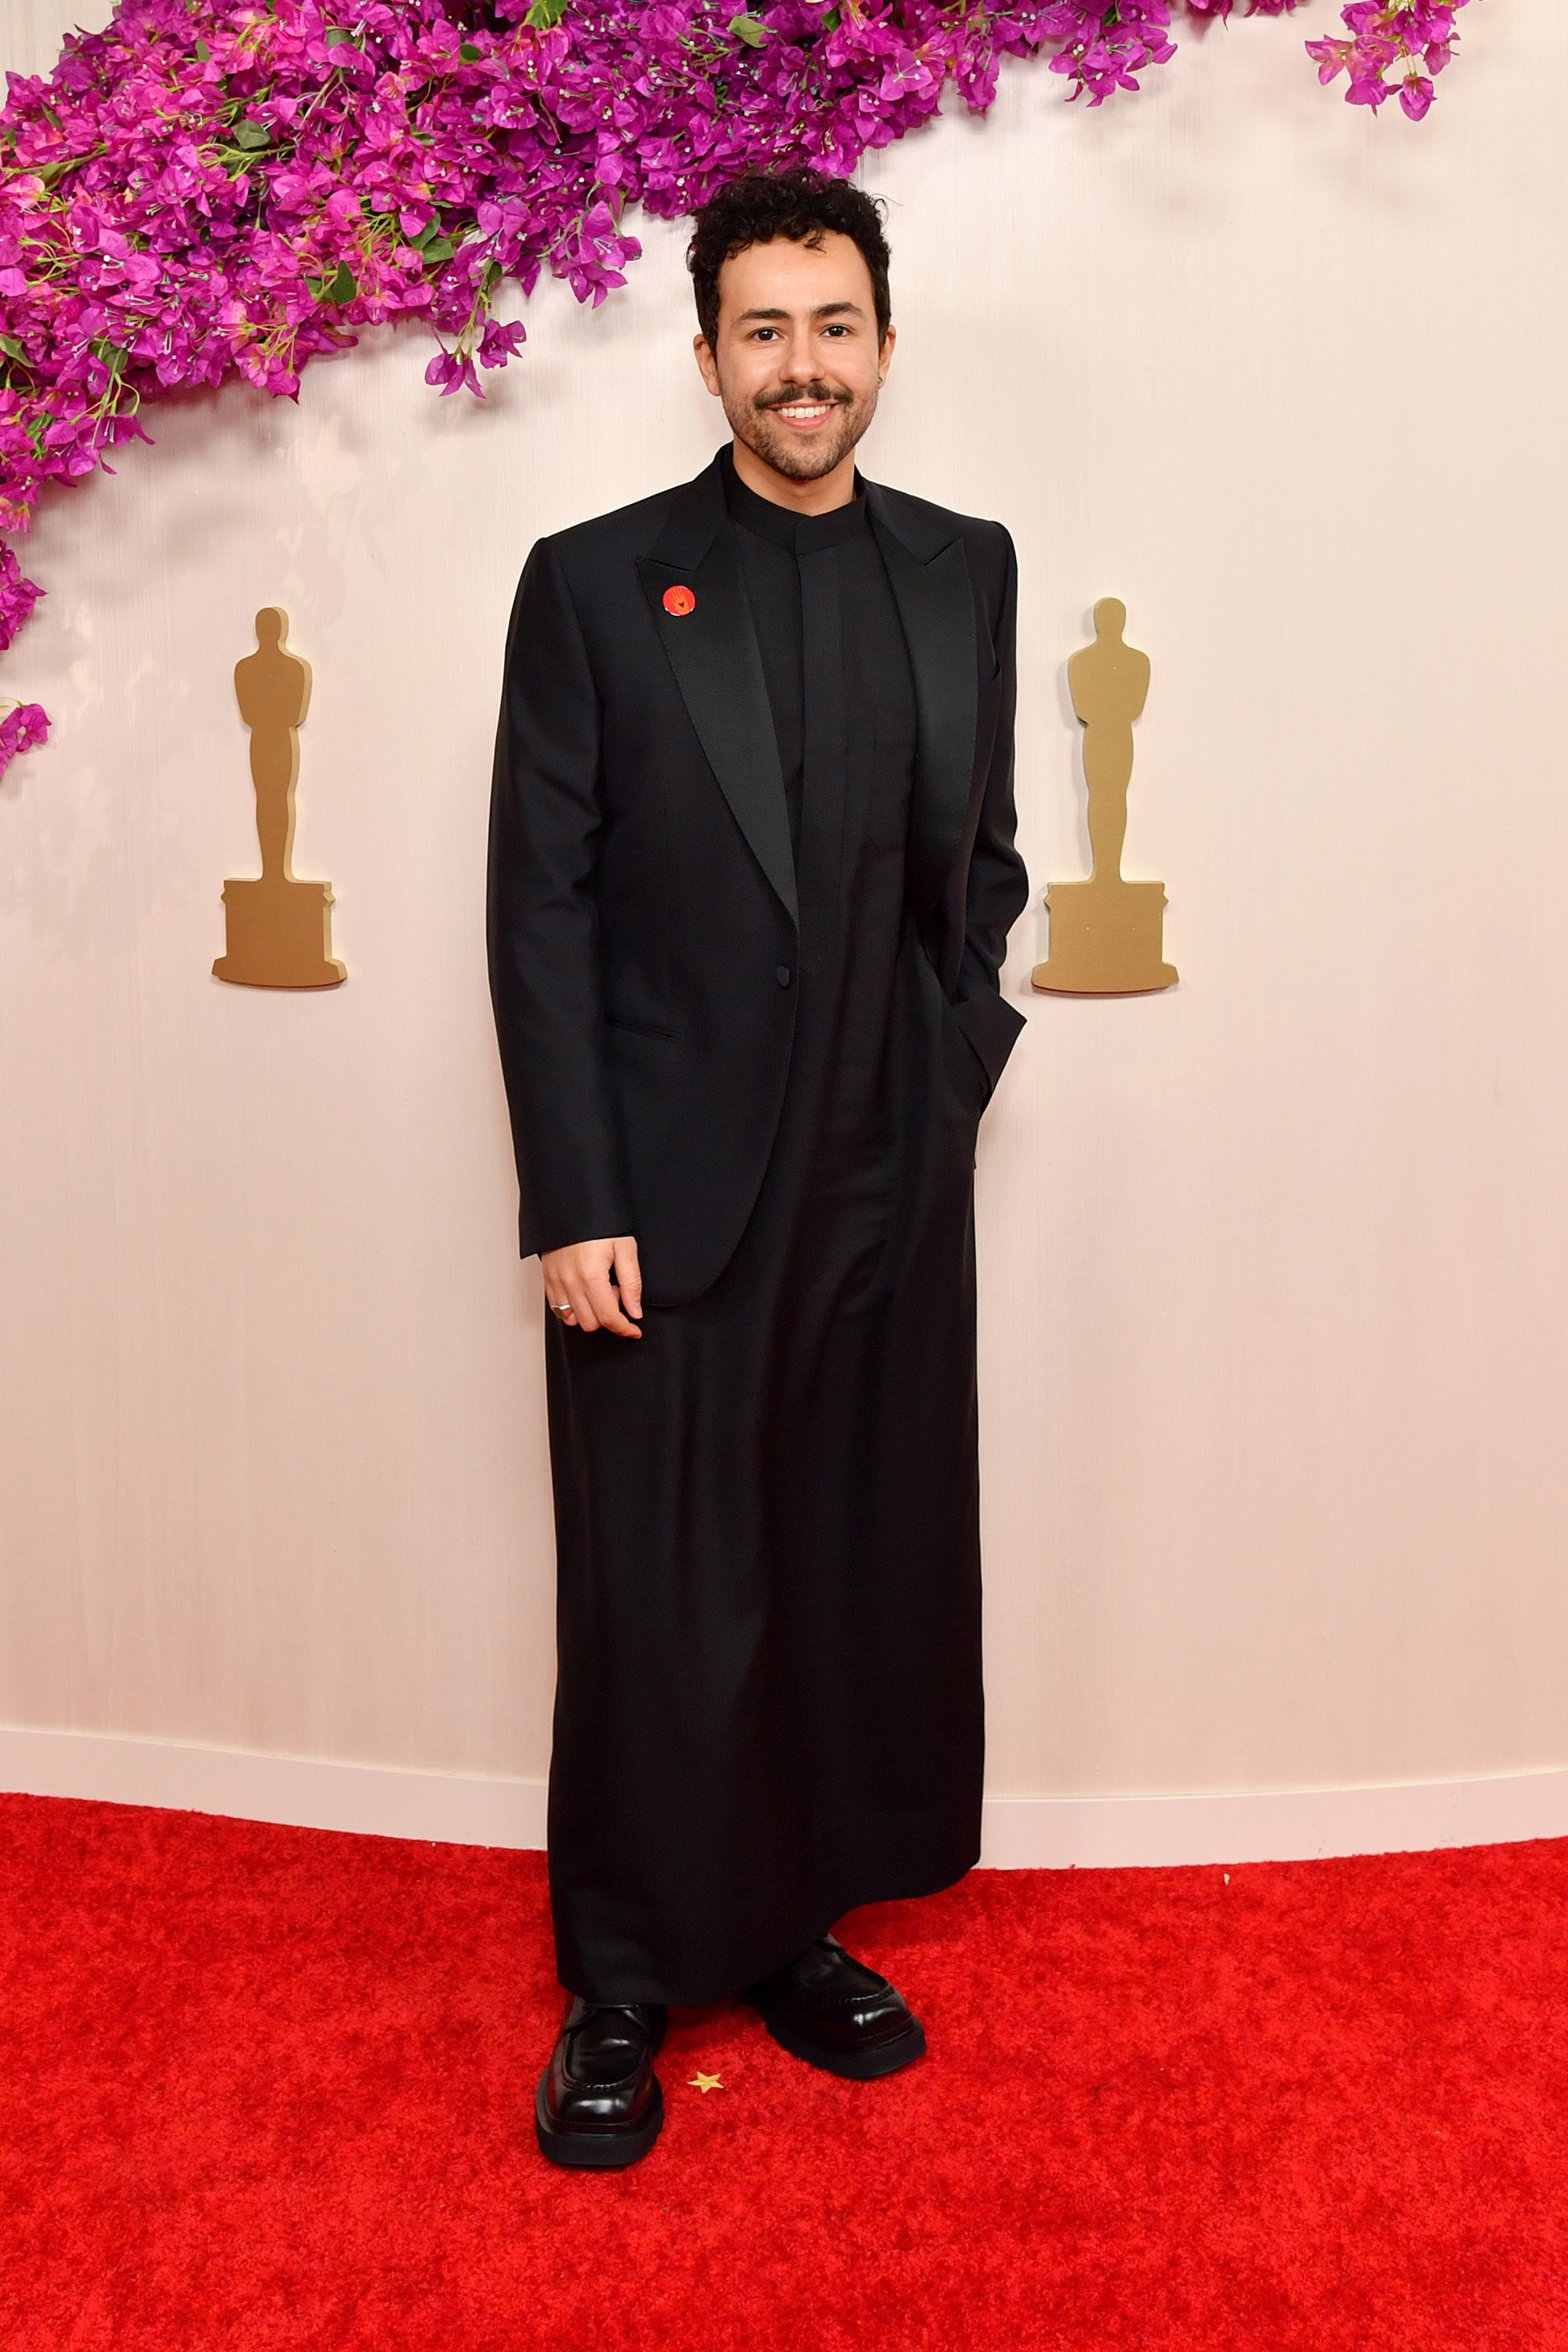 Actor Ramy Youssef wearing the Artists4Ceasefire pin at the Oscars on Sunday.